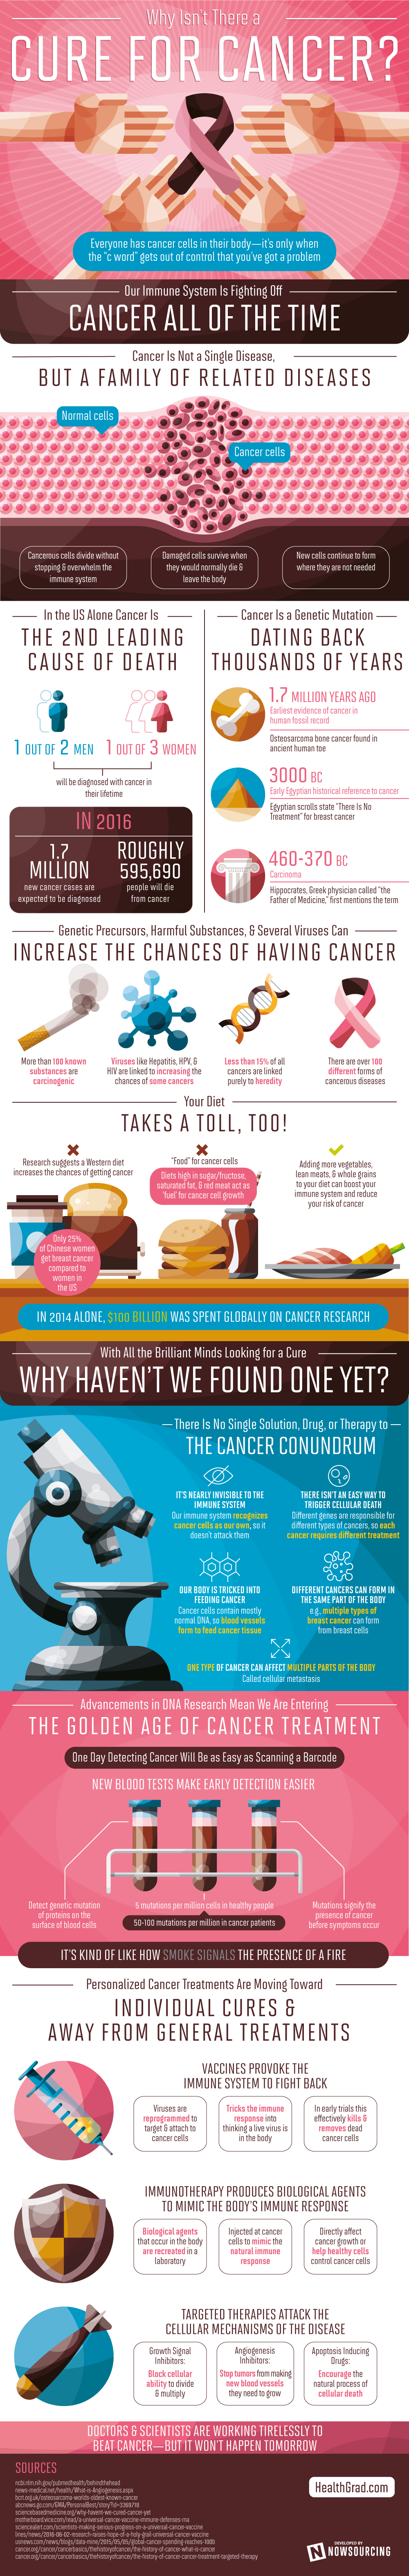 Why Isn’t There a Cure for Cancer? [Infographic]